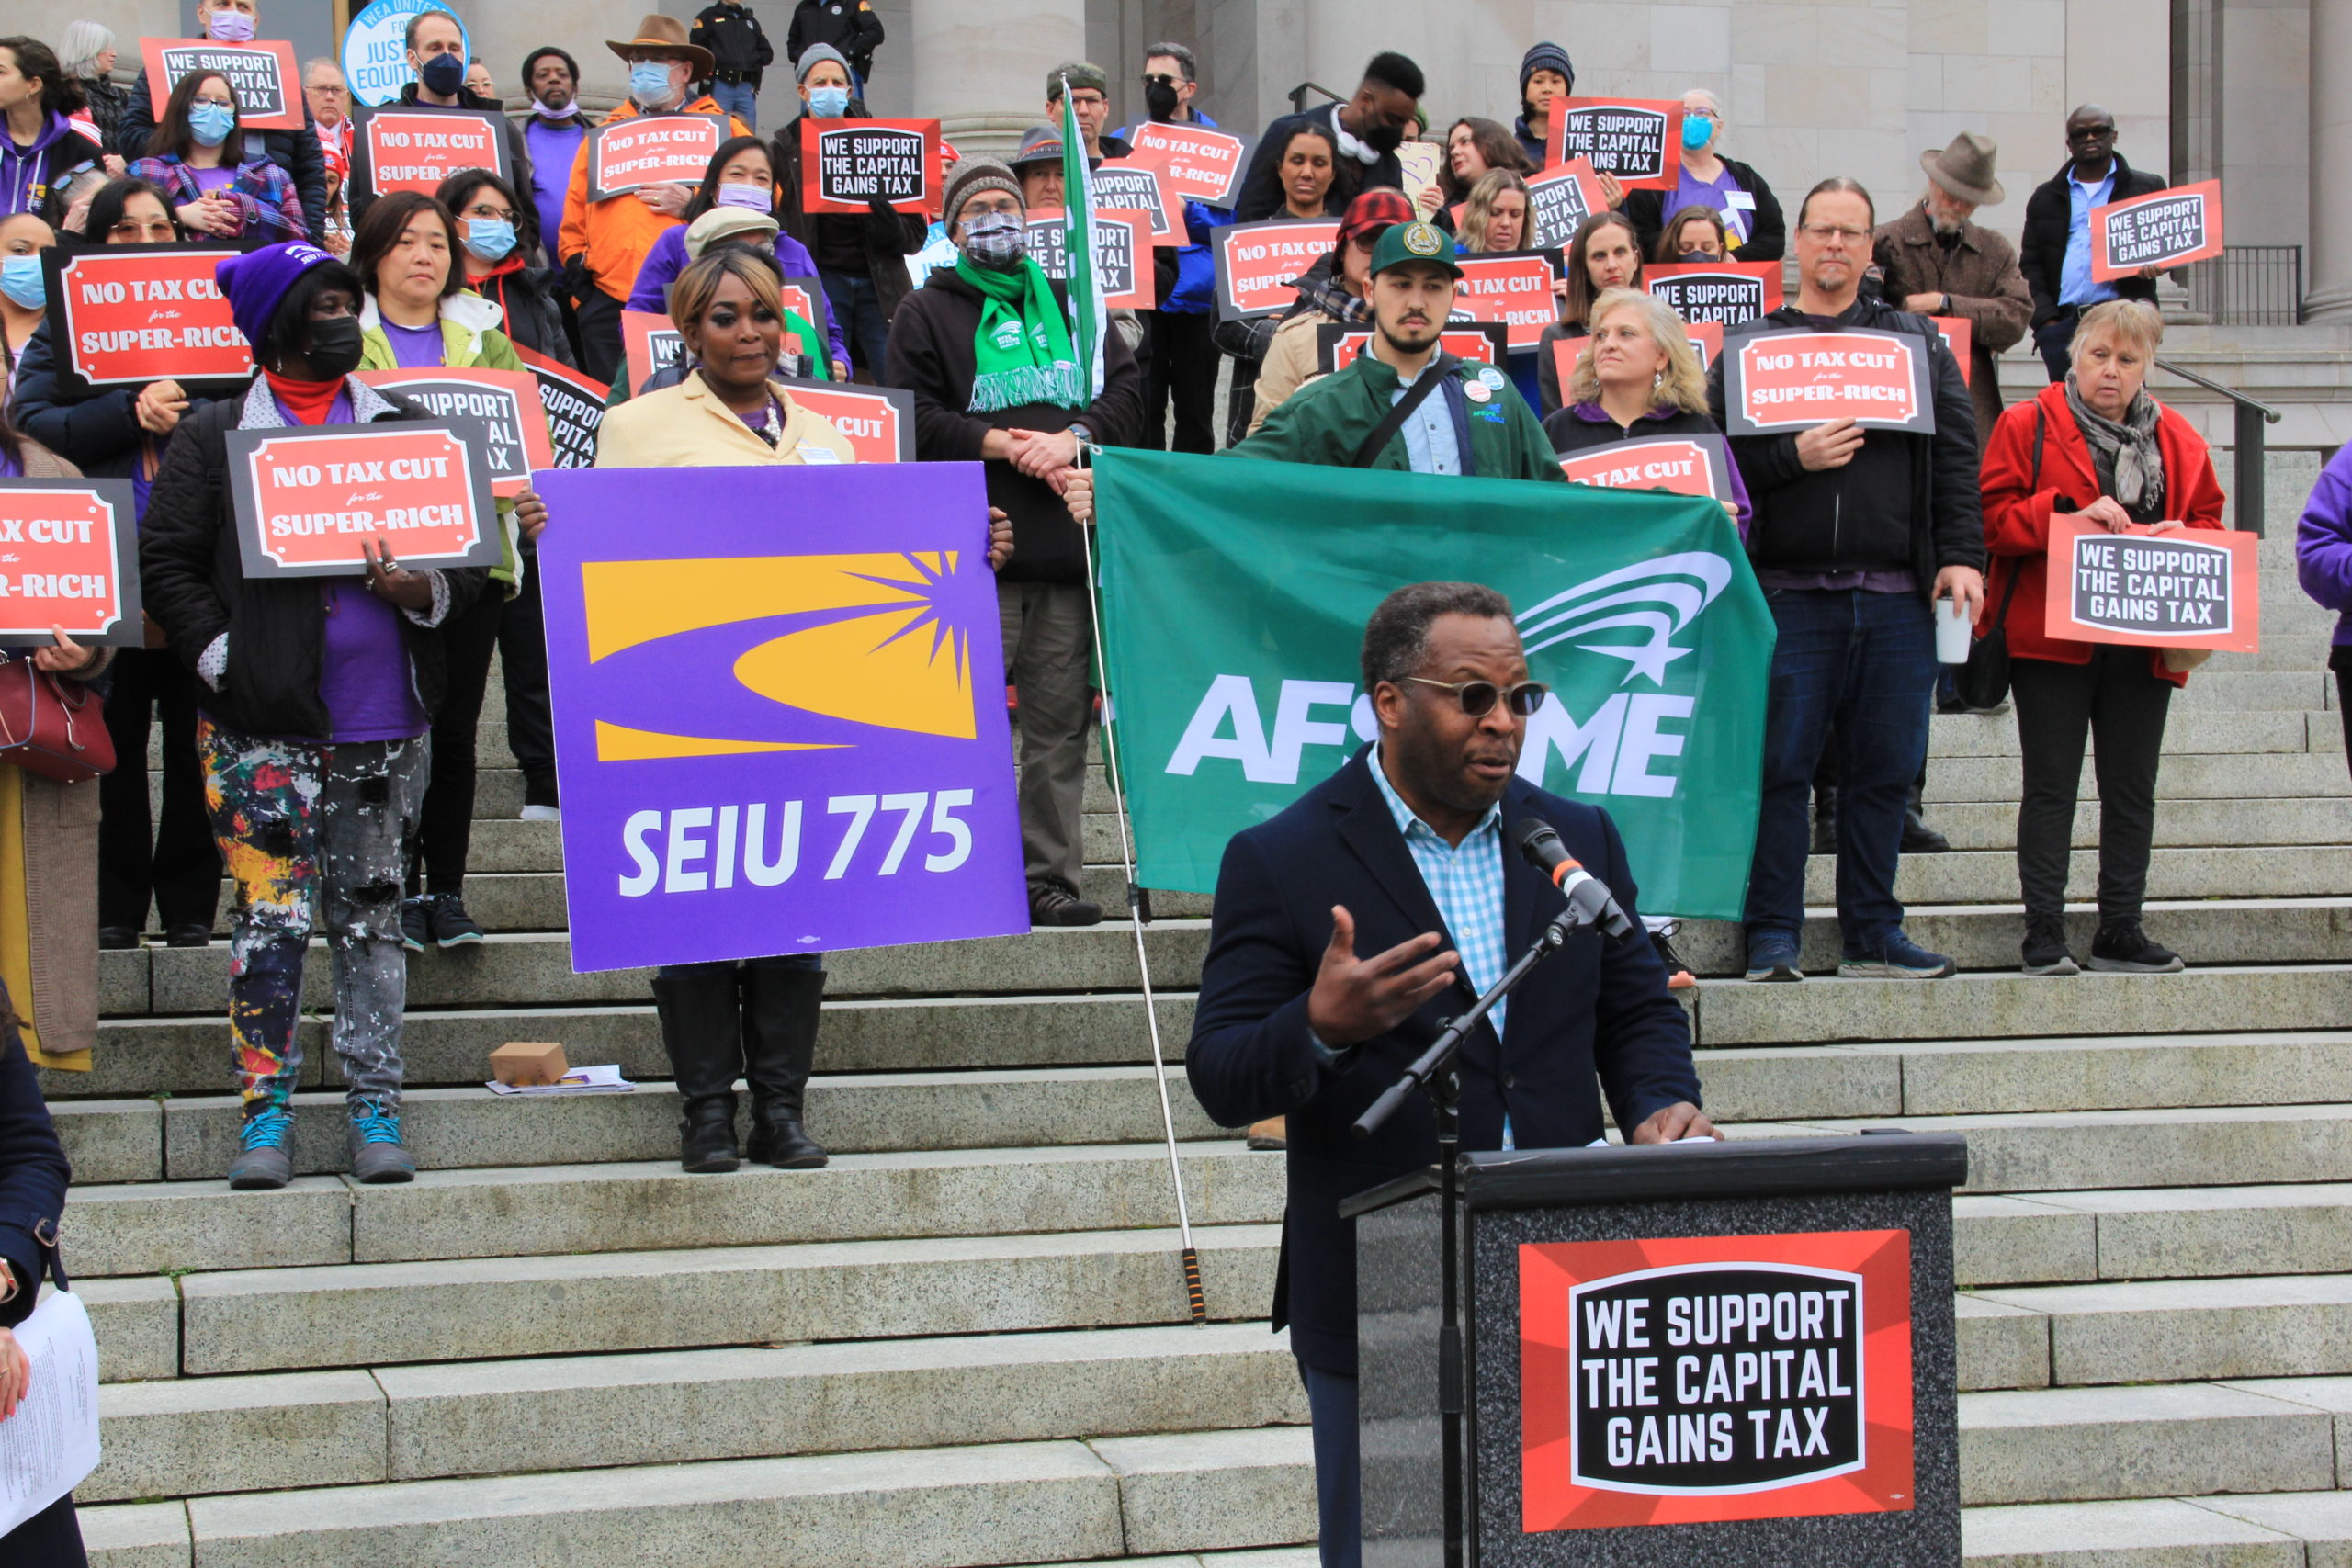 Dr. Stephan Blanford, a Black man, speaks at a podium during a capital gains tax rally. Behind him are advocates from SEIU 775 and AFSCME.